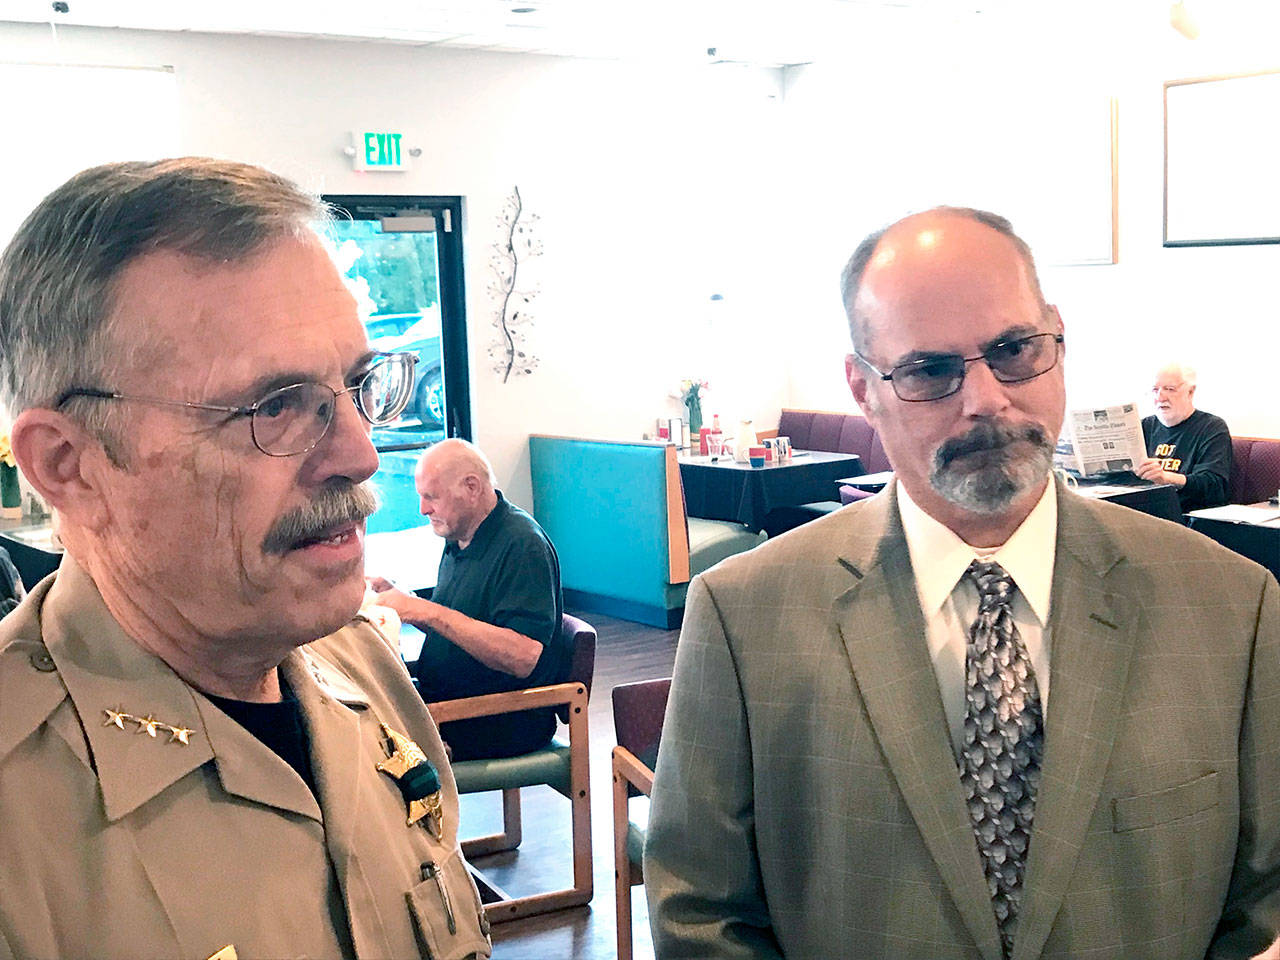 Incumbent Clallam County Sheriff Bill Benedict, left, and challenger Jim McLaughlin appeared for their first question-and-answer forum of the election season Tuesday. (Paul Gottlieb/Peninsula Daily News)